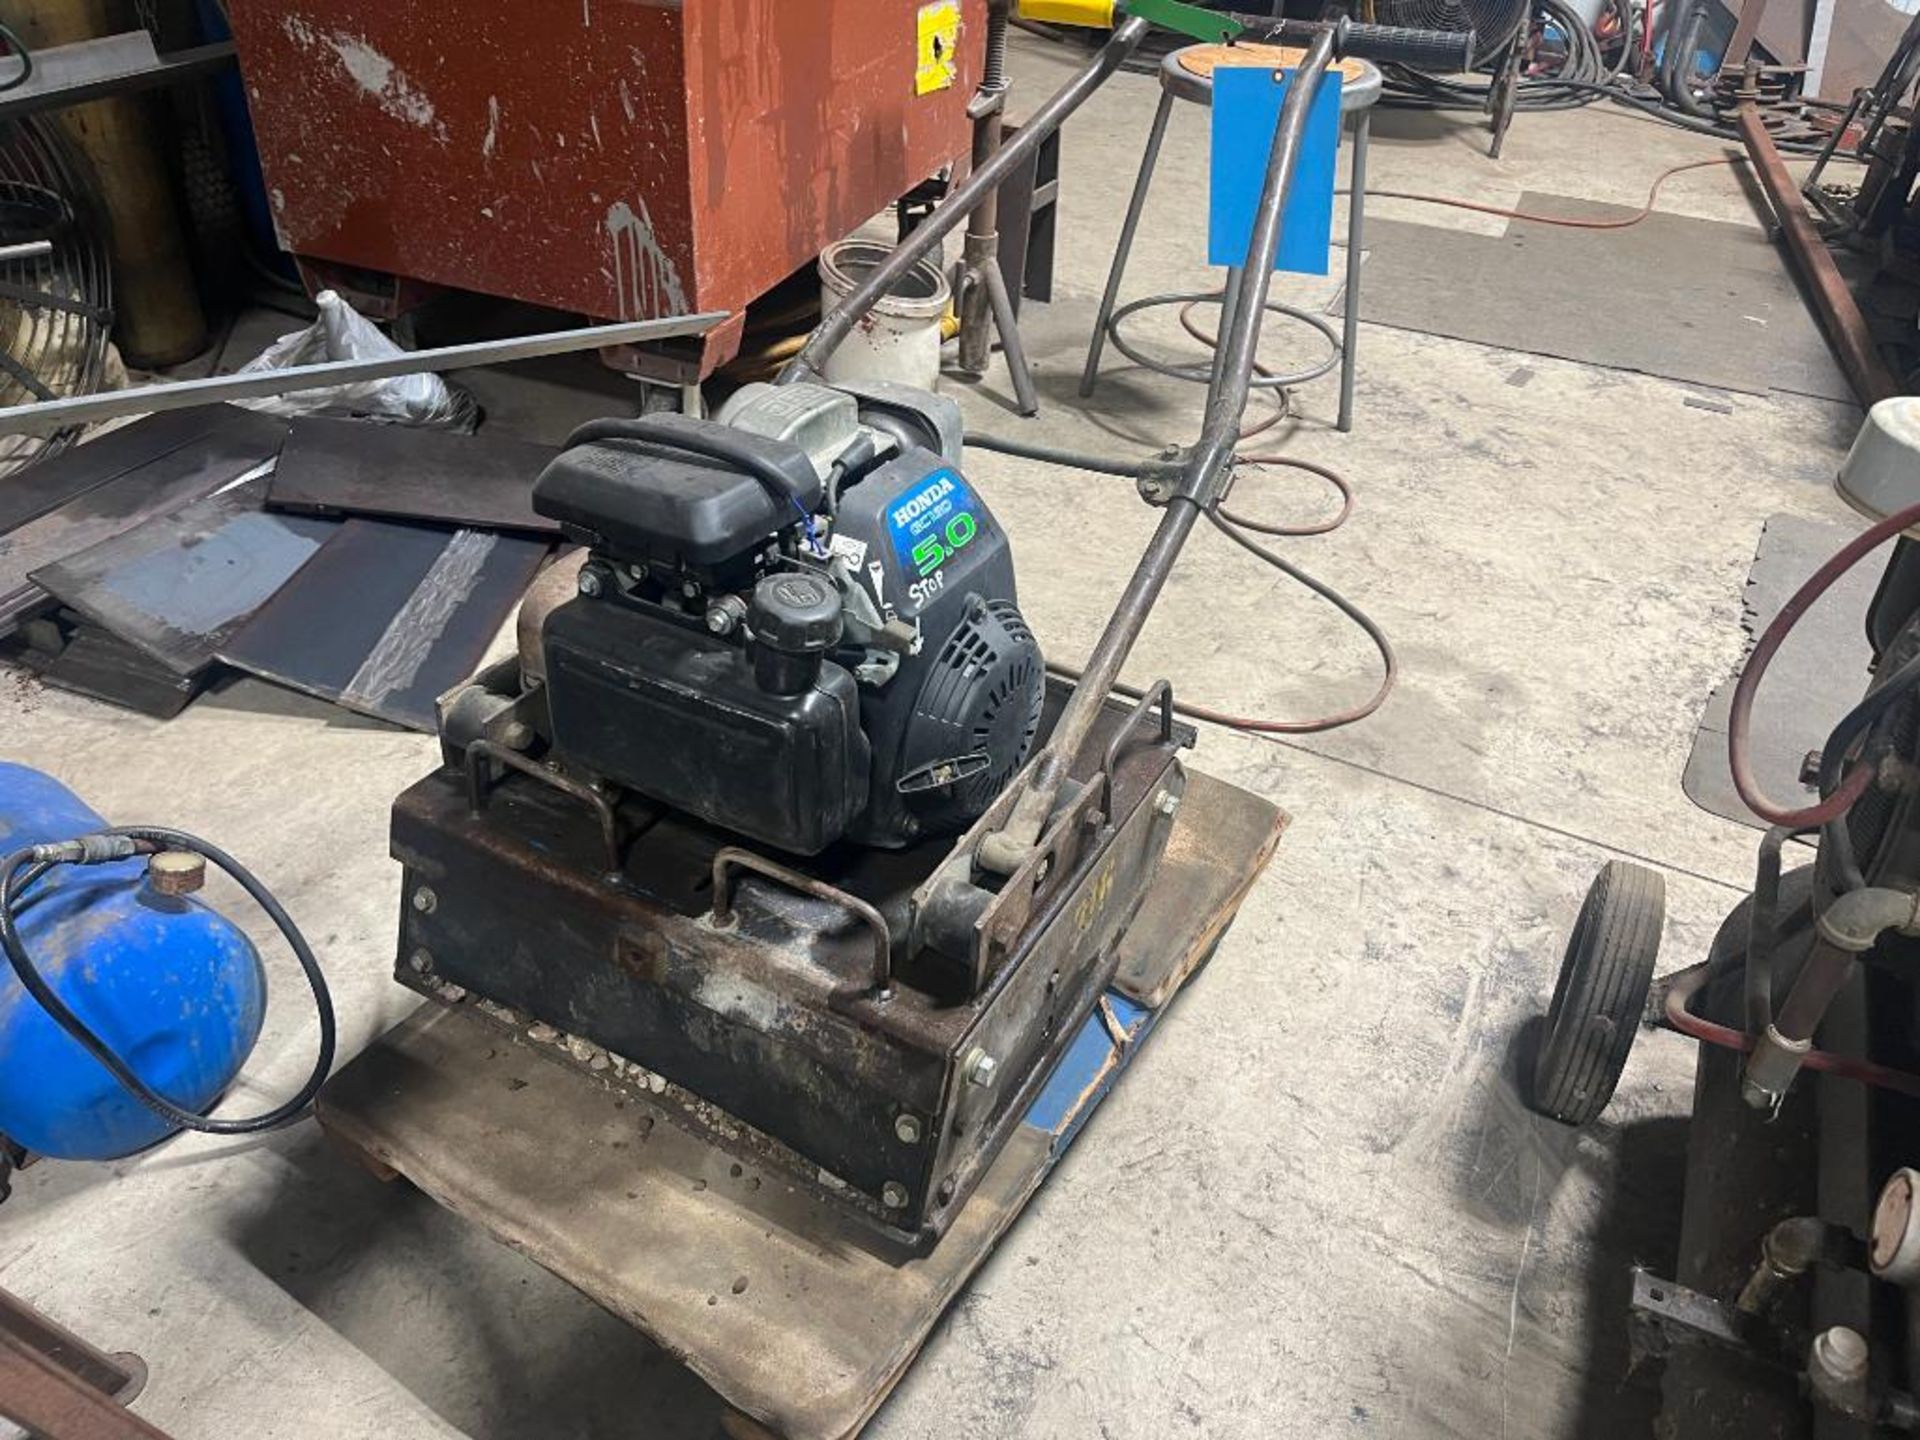 Plate Compactor with Honda GC160 motor